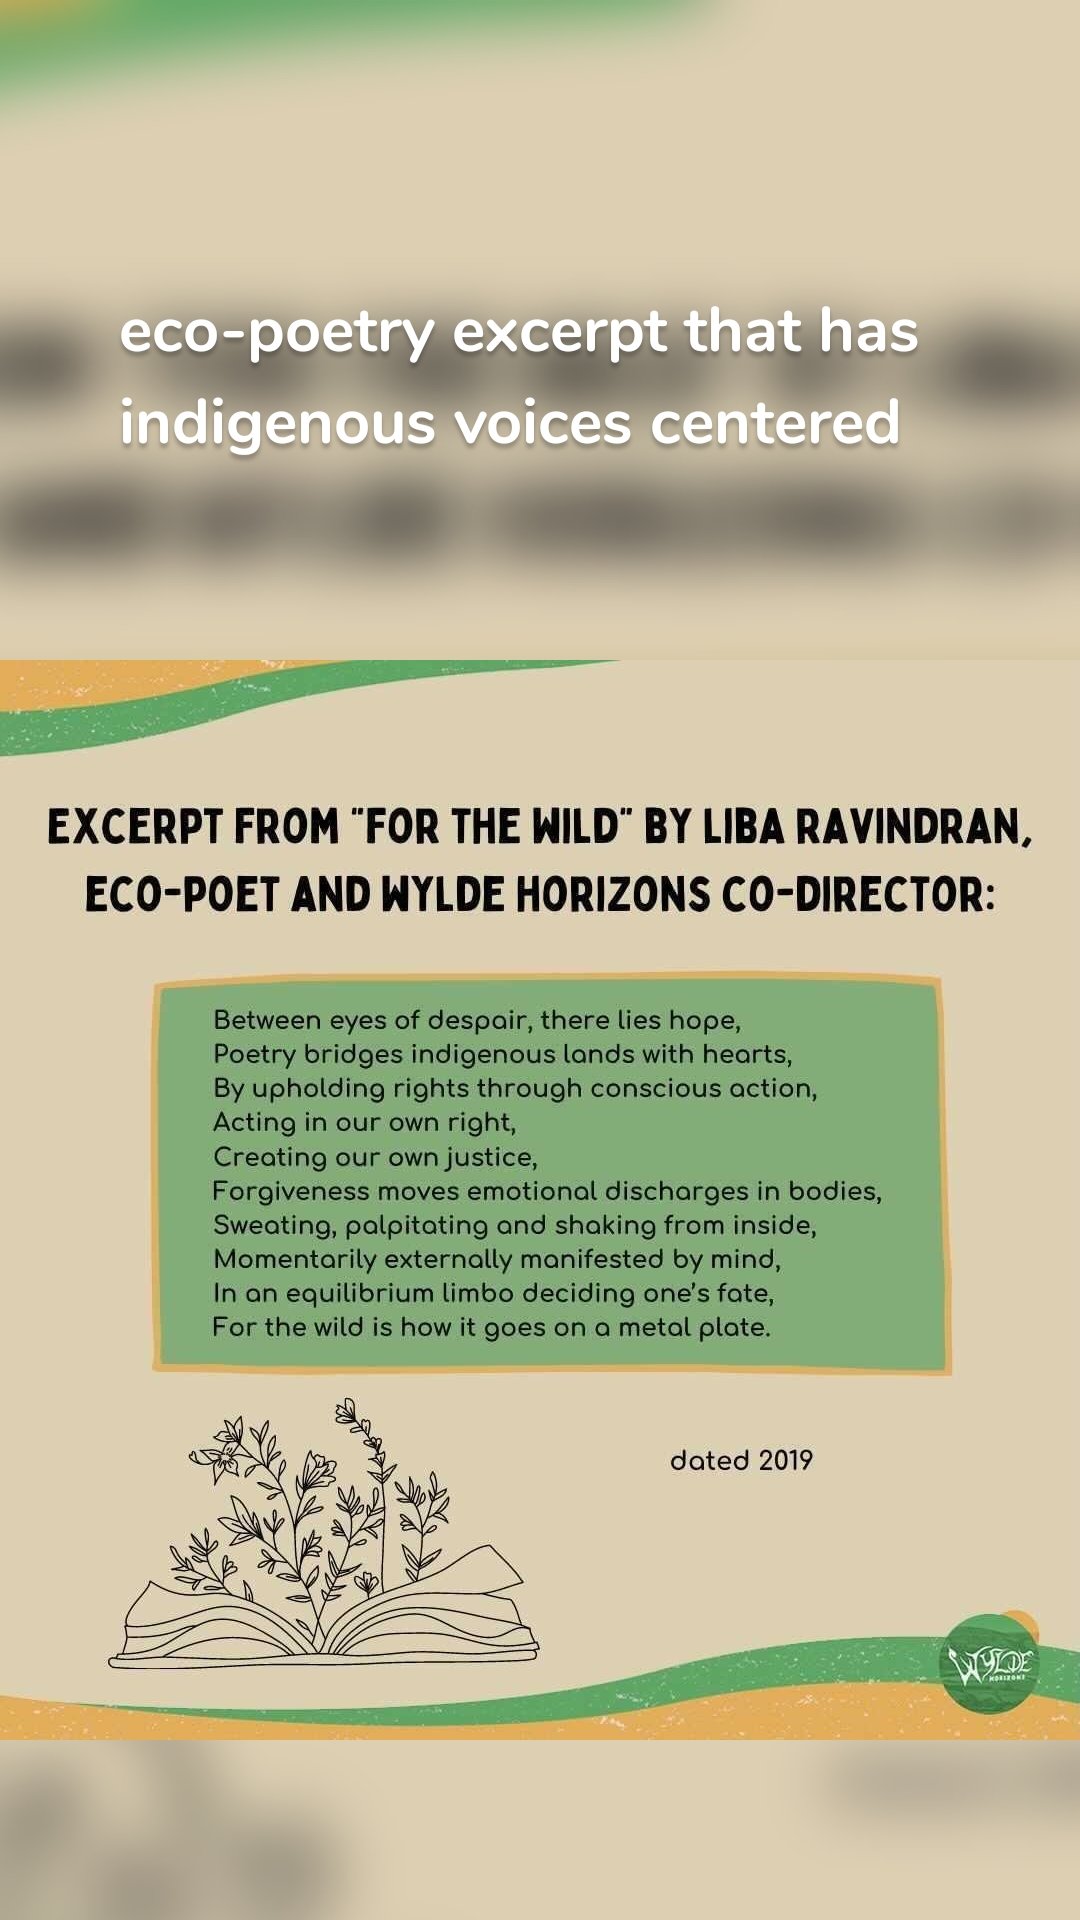 eco-poetry excerpt that has indigenous voices centered